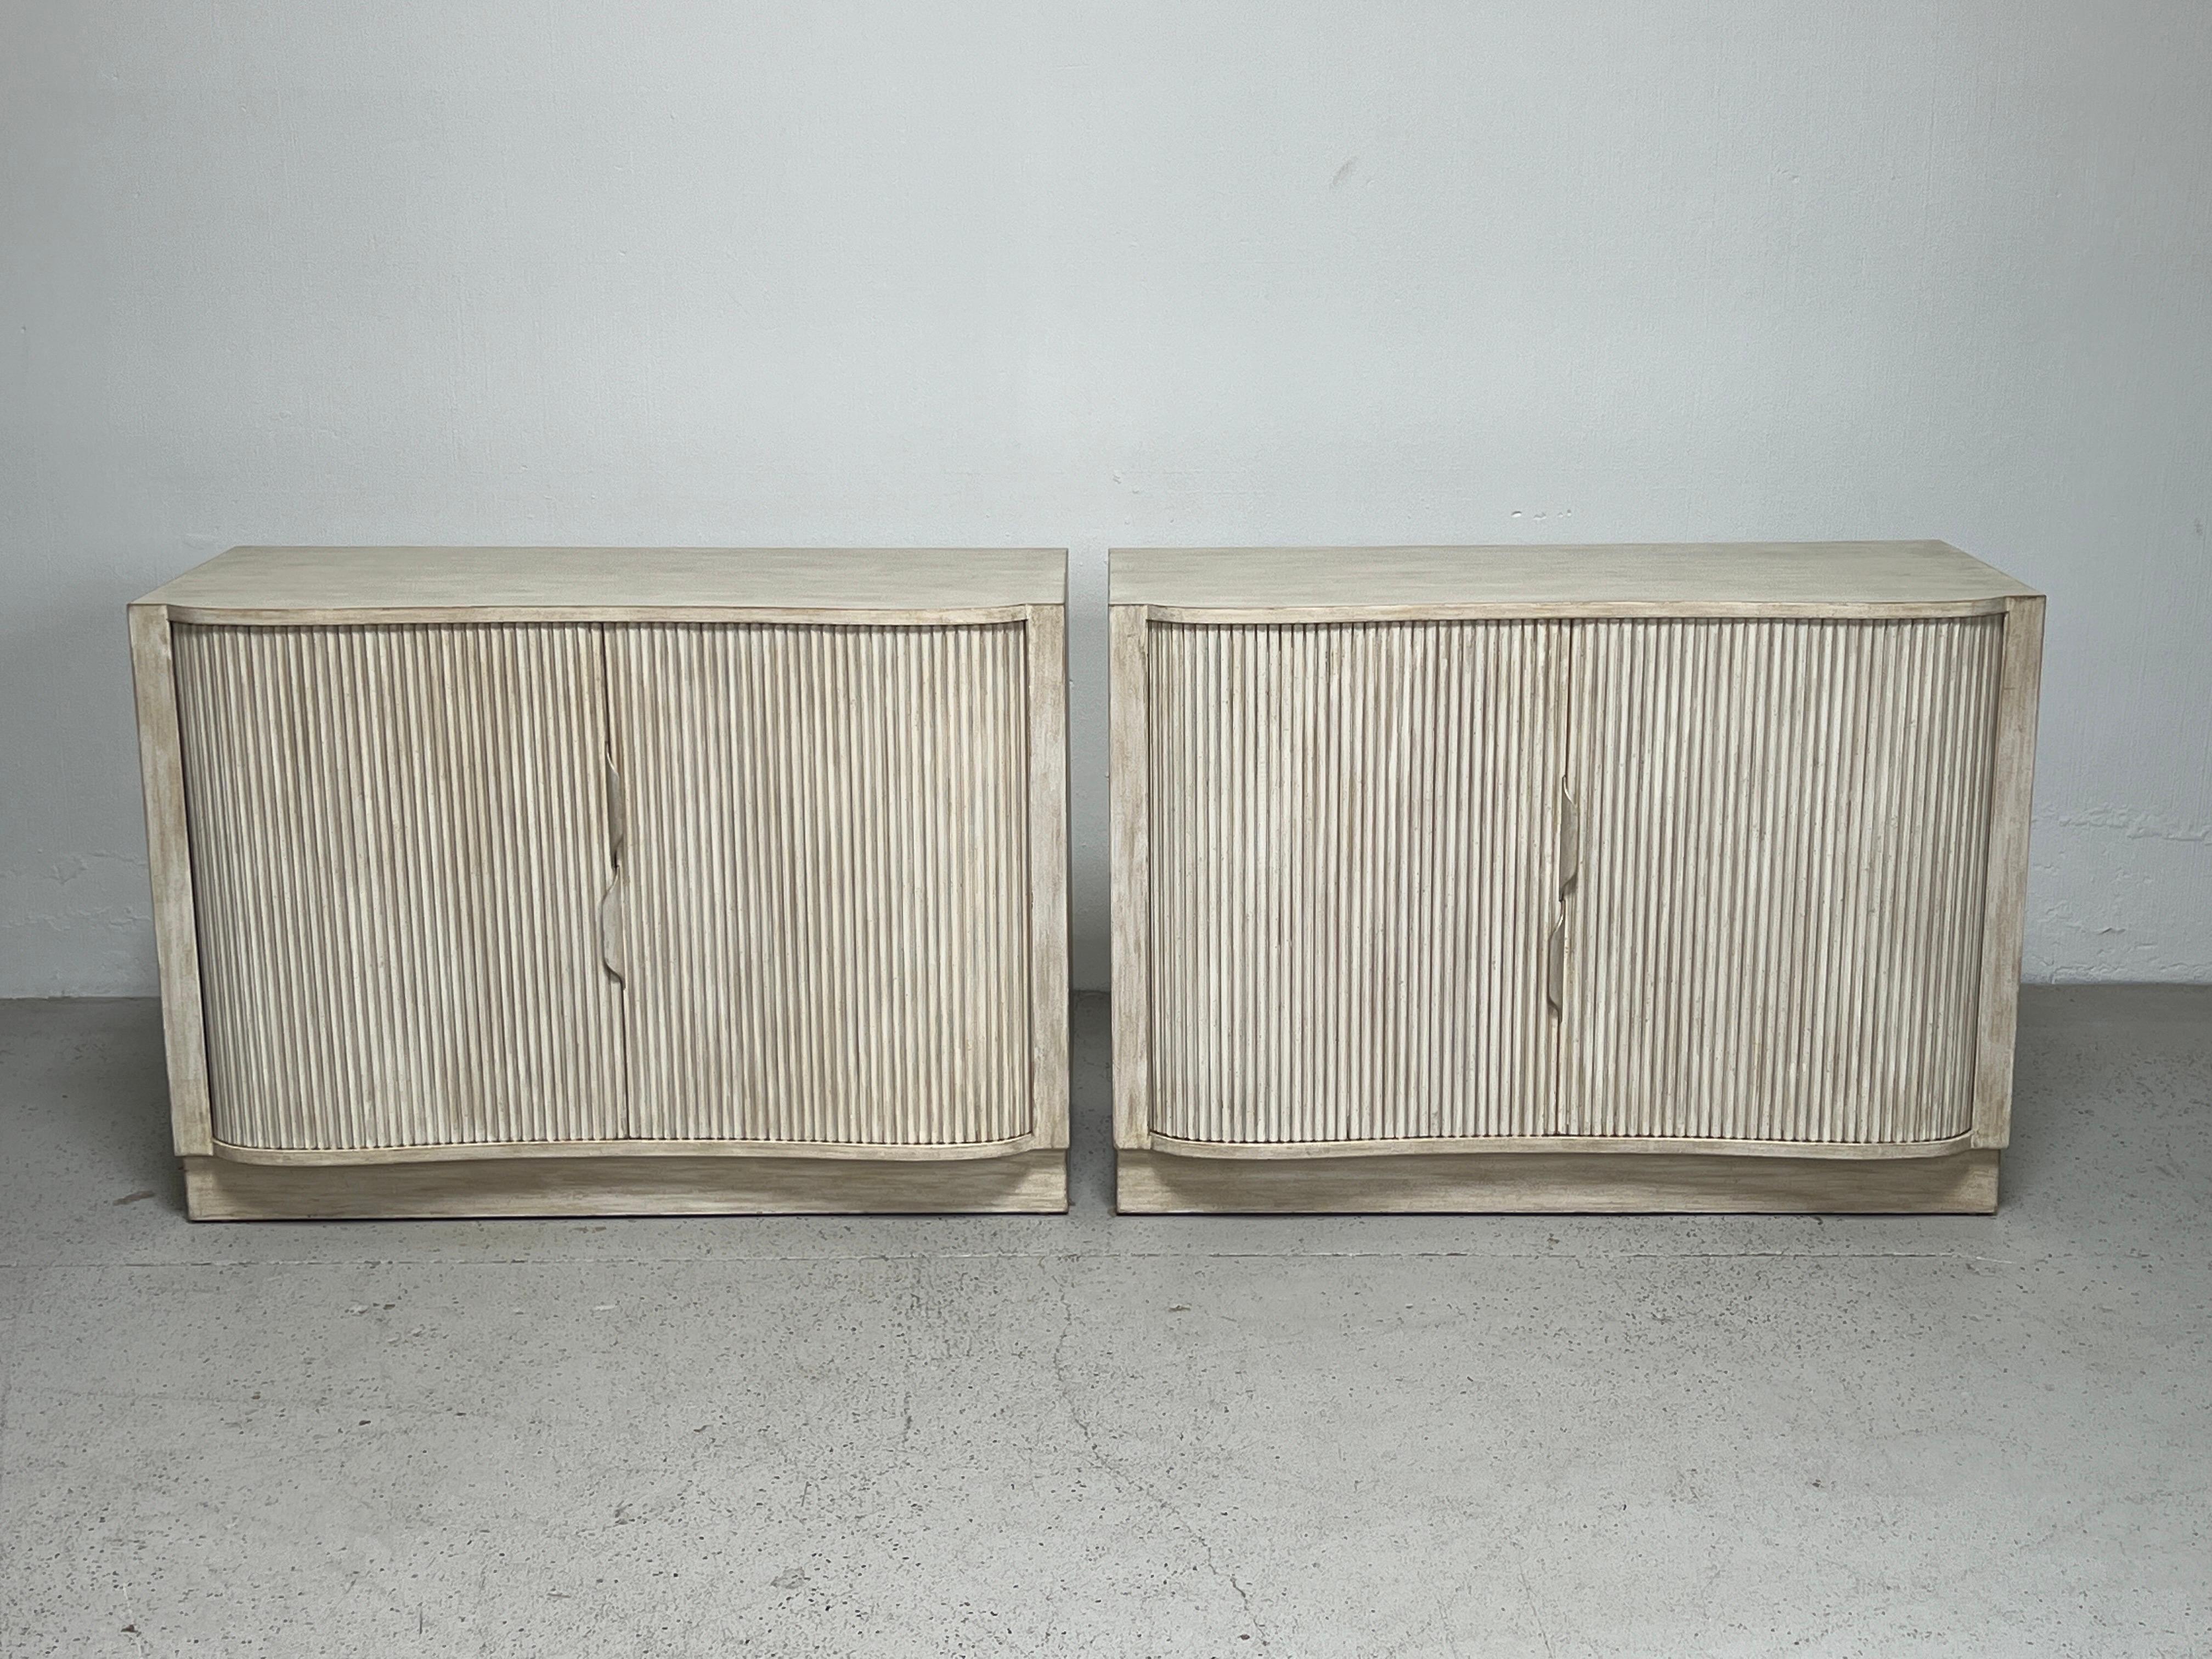 A pair of cerused tambour door serpentine cabinets designed by Edward Wormley for Dunbar.